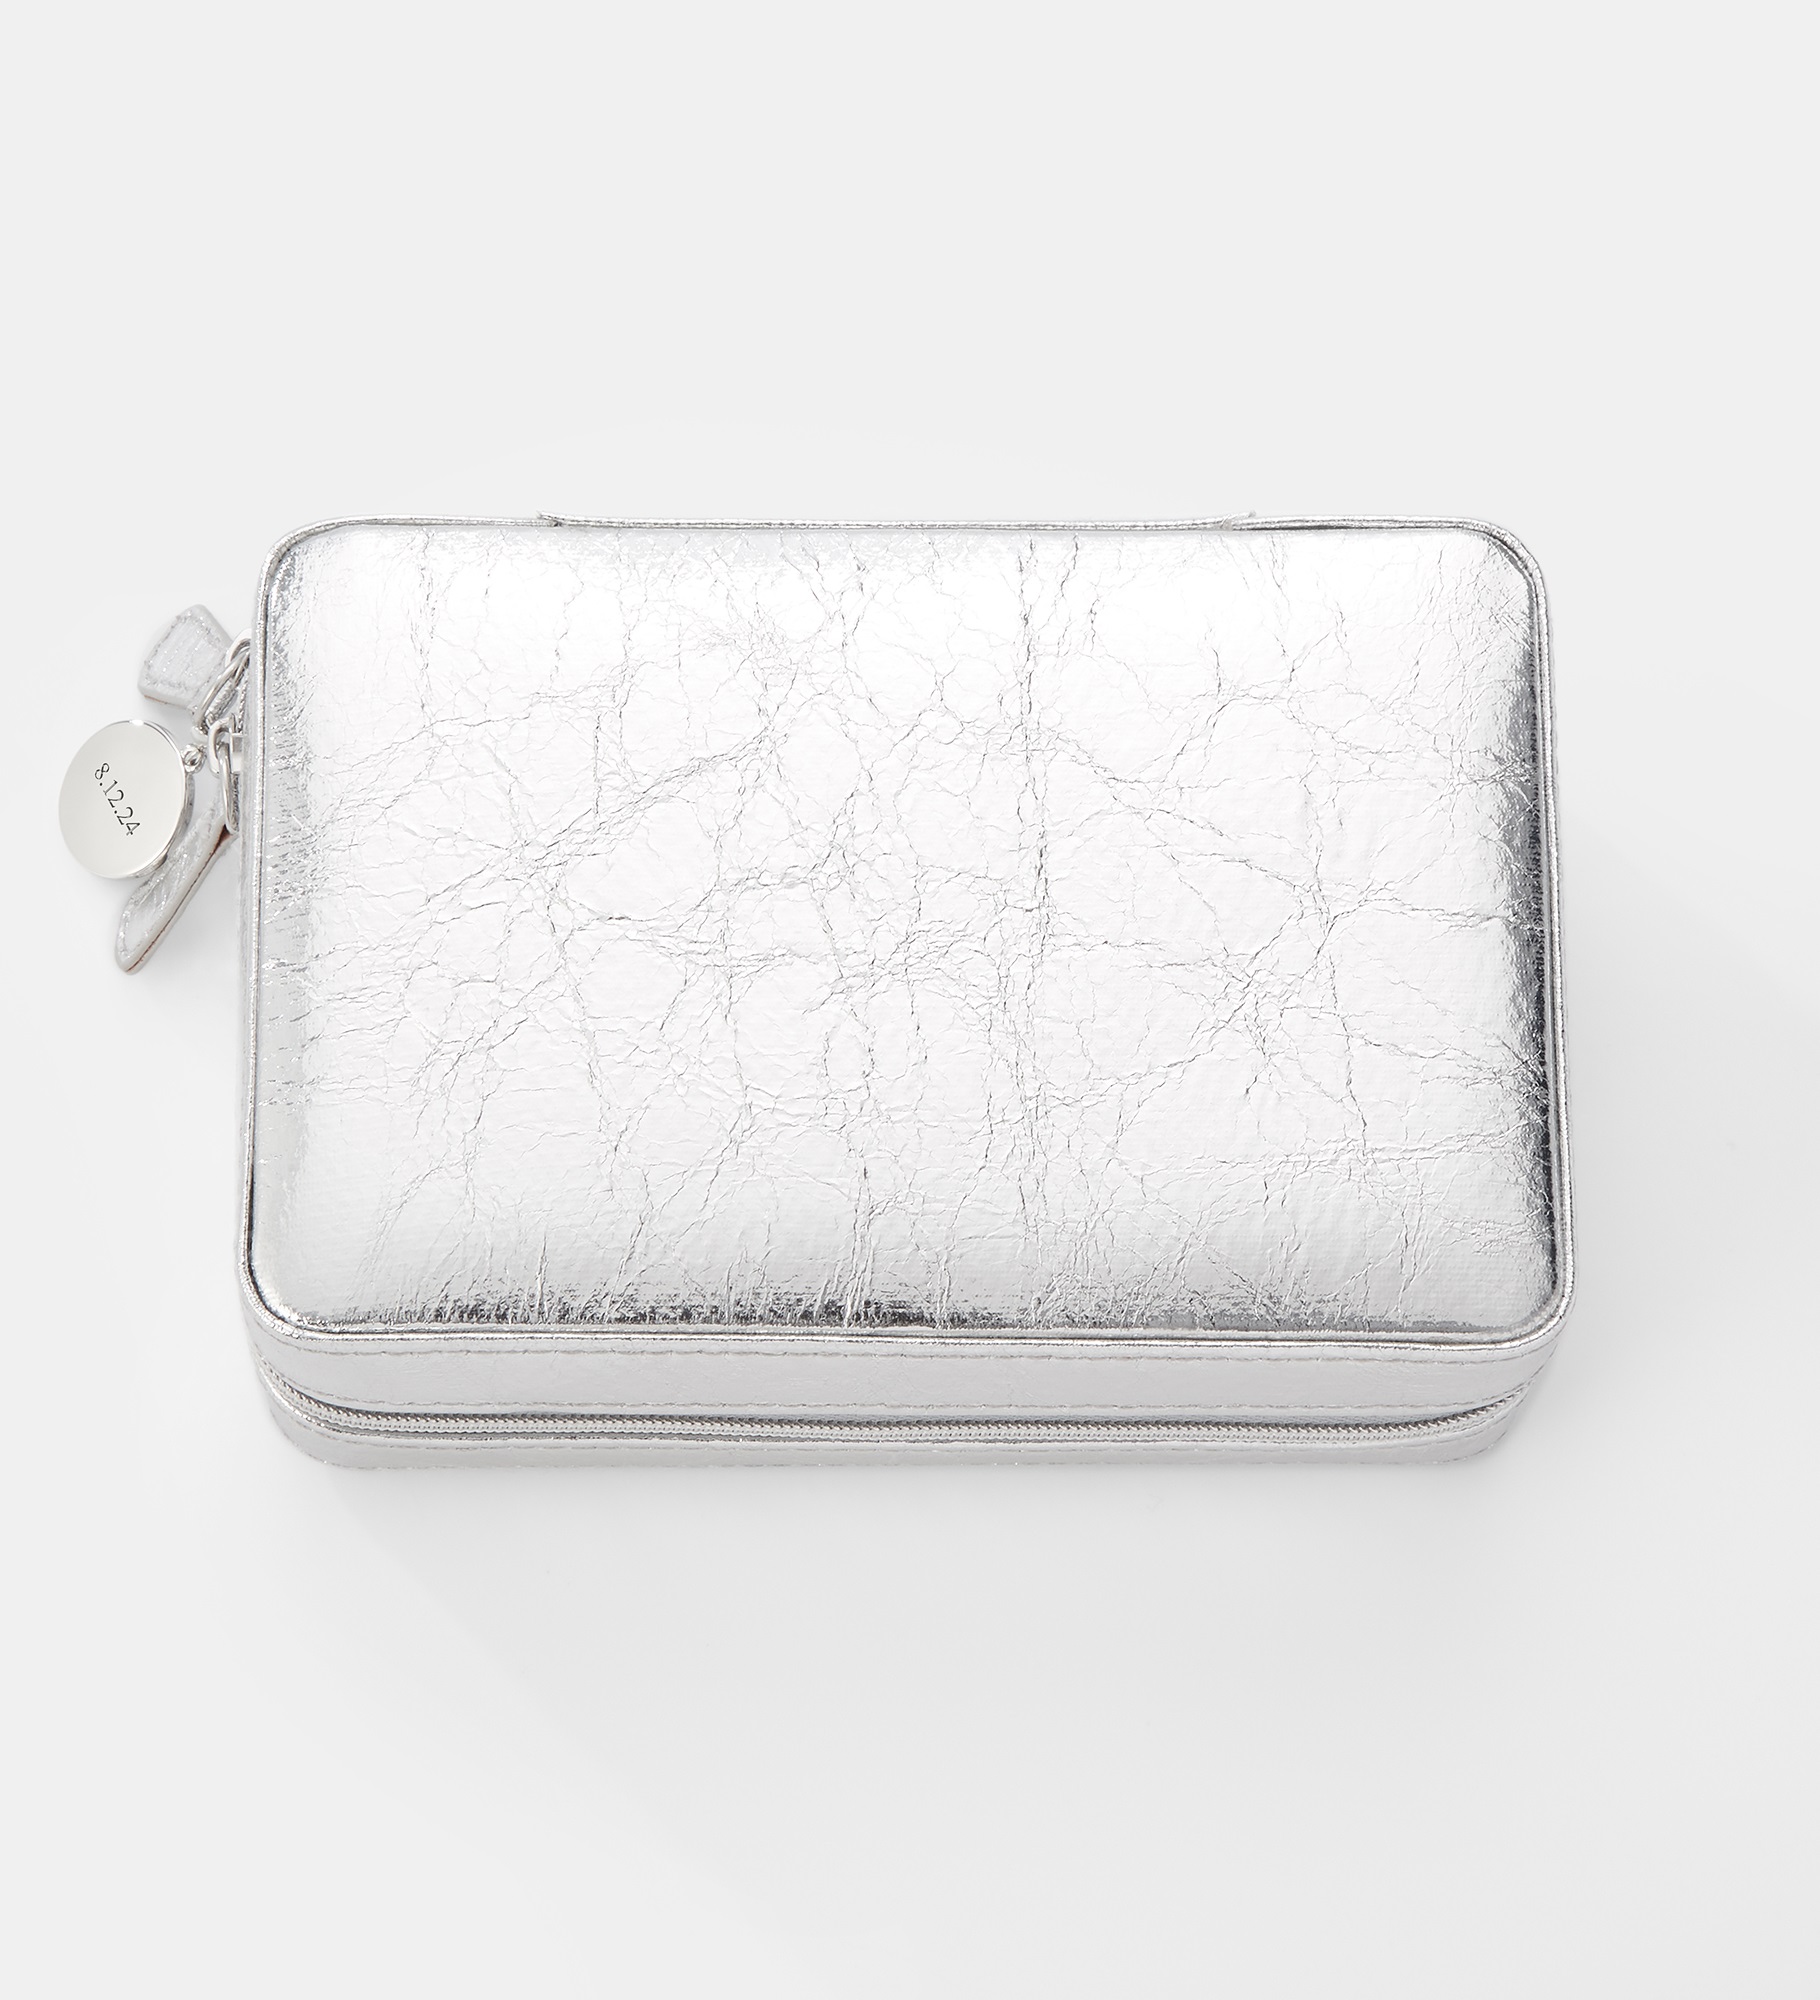  Engraved Rectangle Jewelry Box and Travel Case in Silver